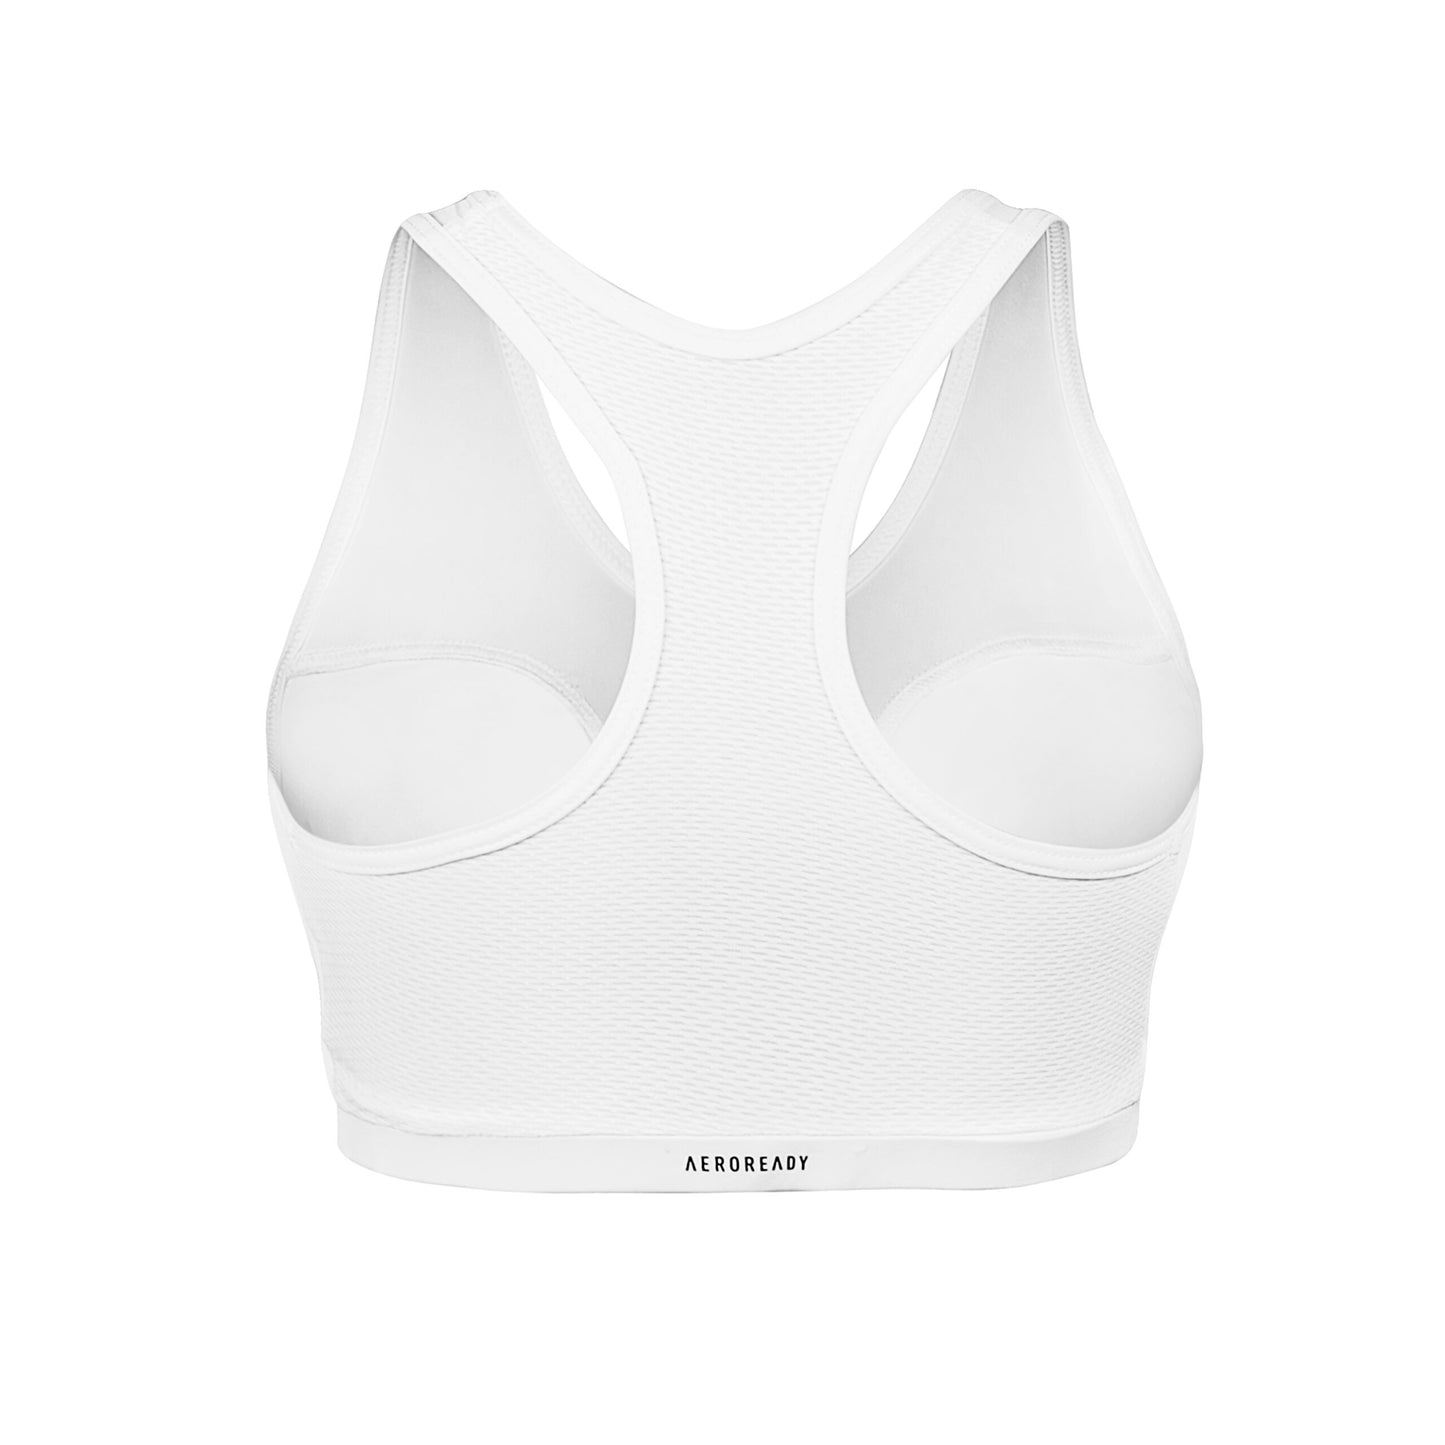 Adibp12 Adidas Wkf Approved Female Breast Protector White 03